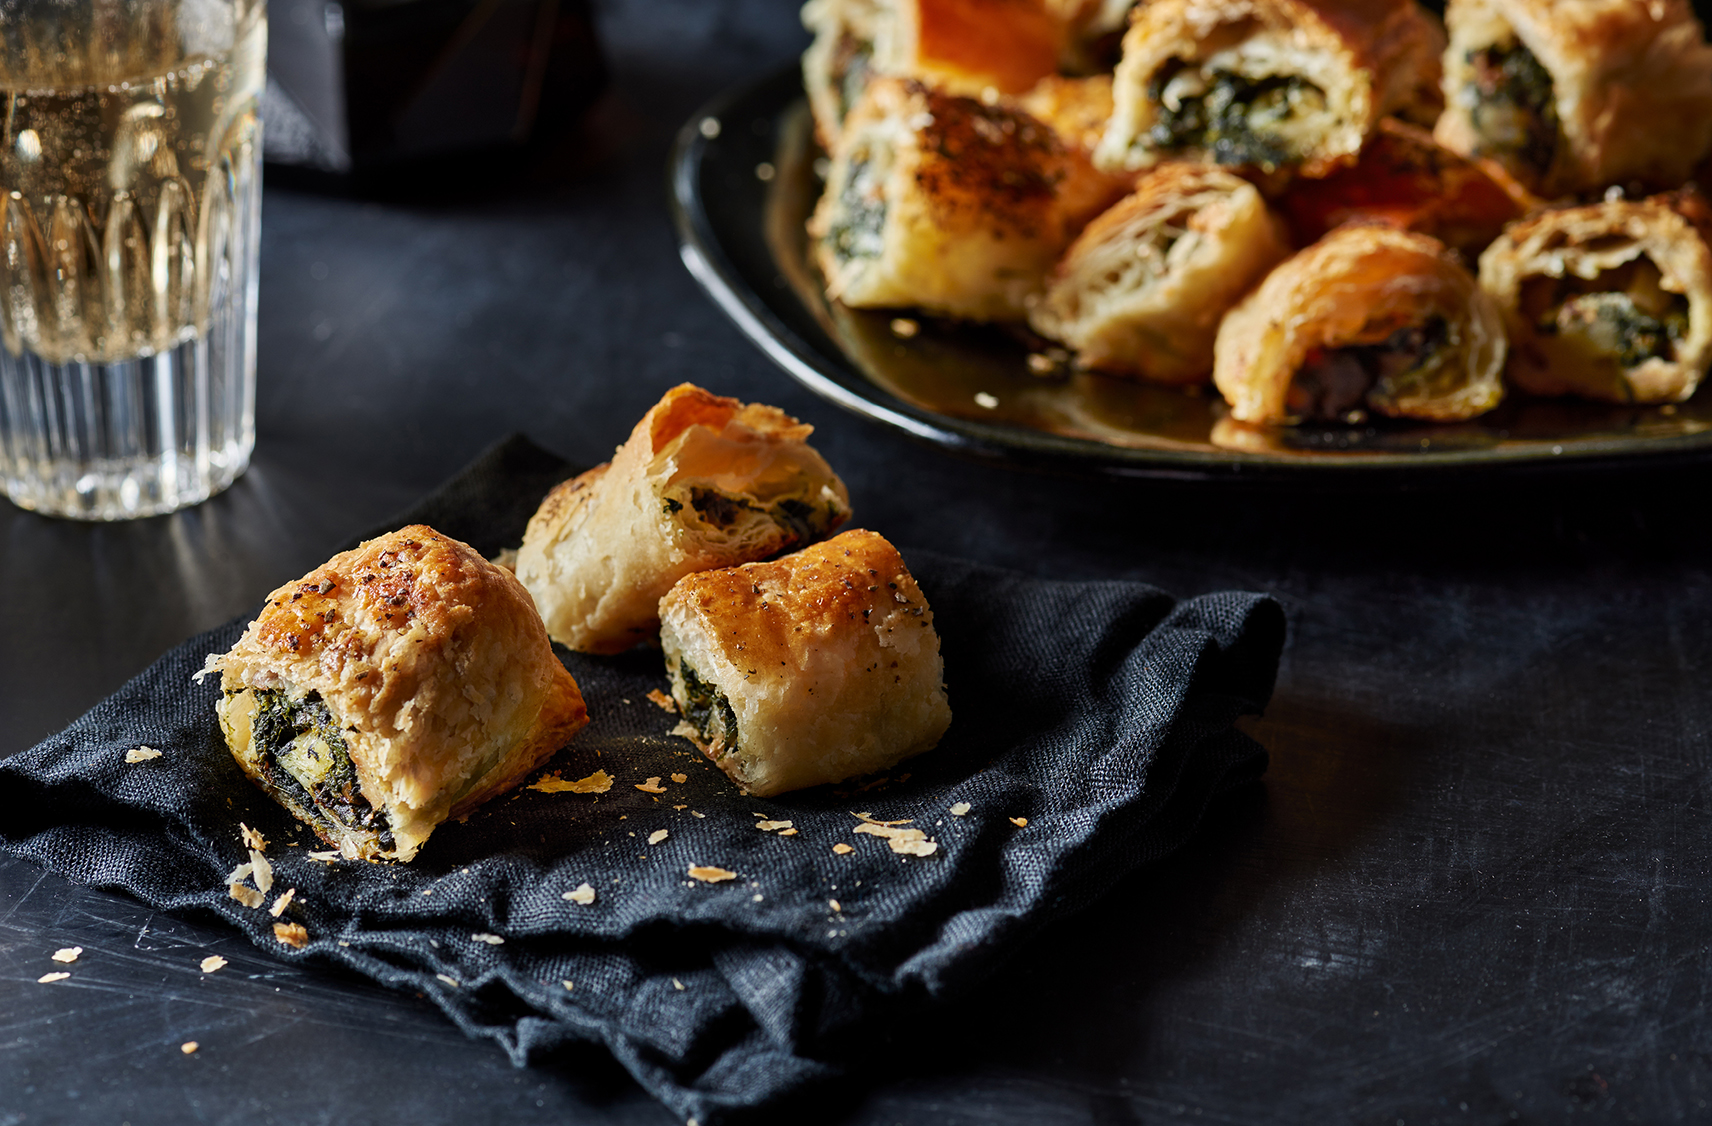 3 crispy rolls of puff pastry stuffed with Roquefort, walnuts and spinach.